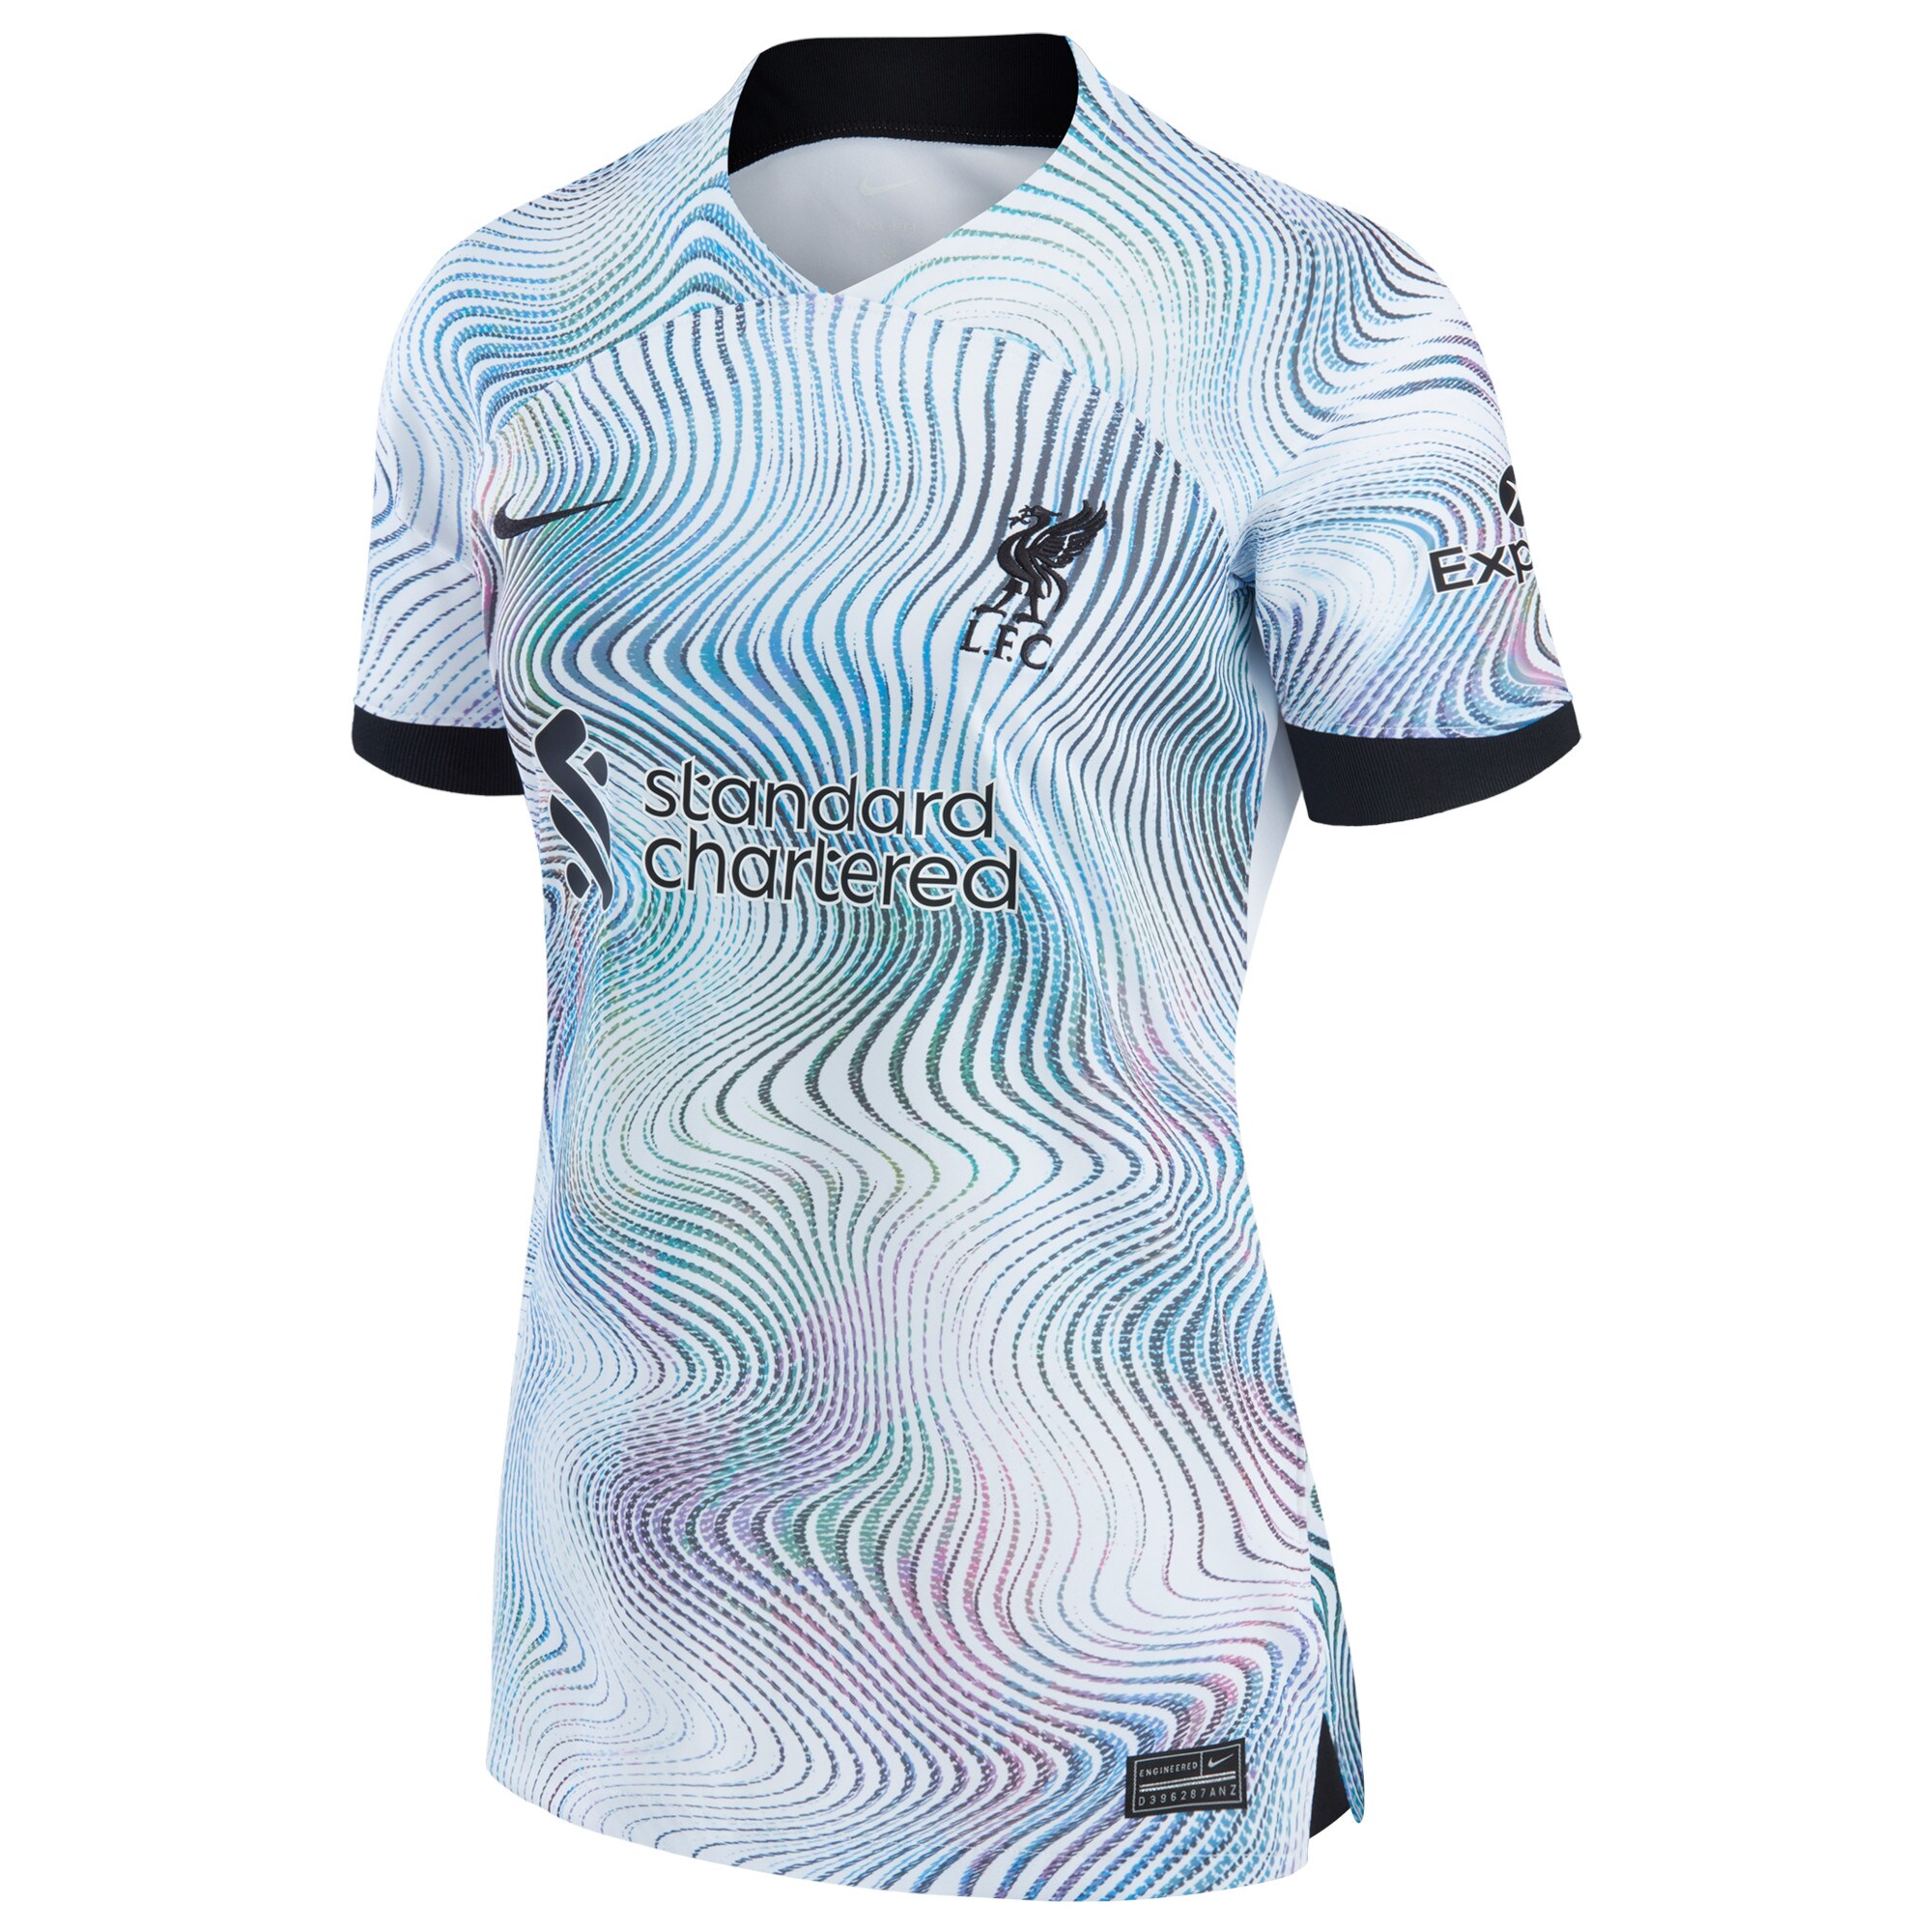 peamu.fr - Maillot foot liverpool Femme Exterieur 2022-2023 Fiable I092